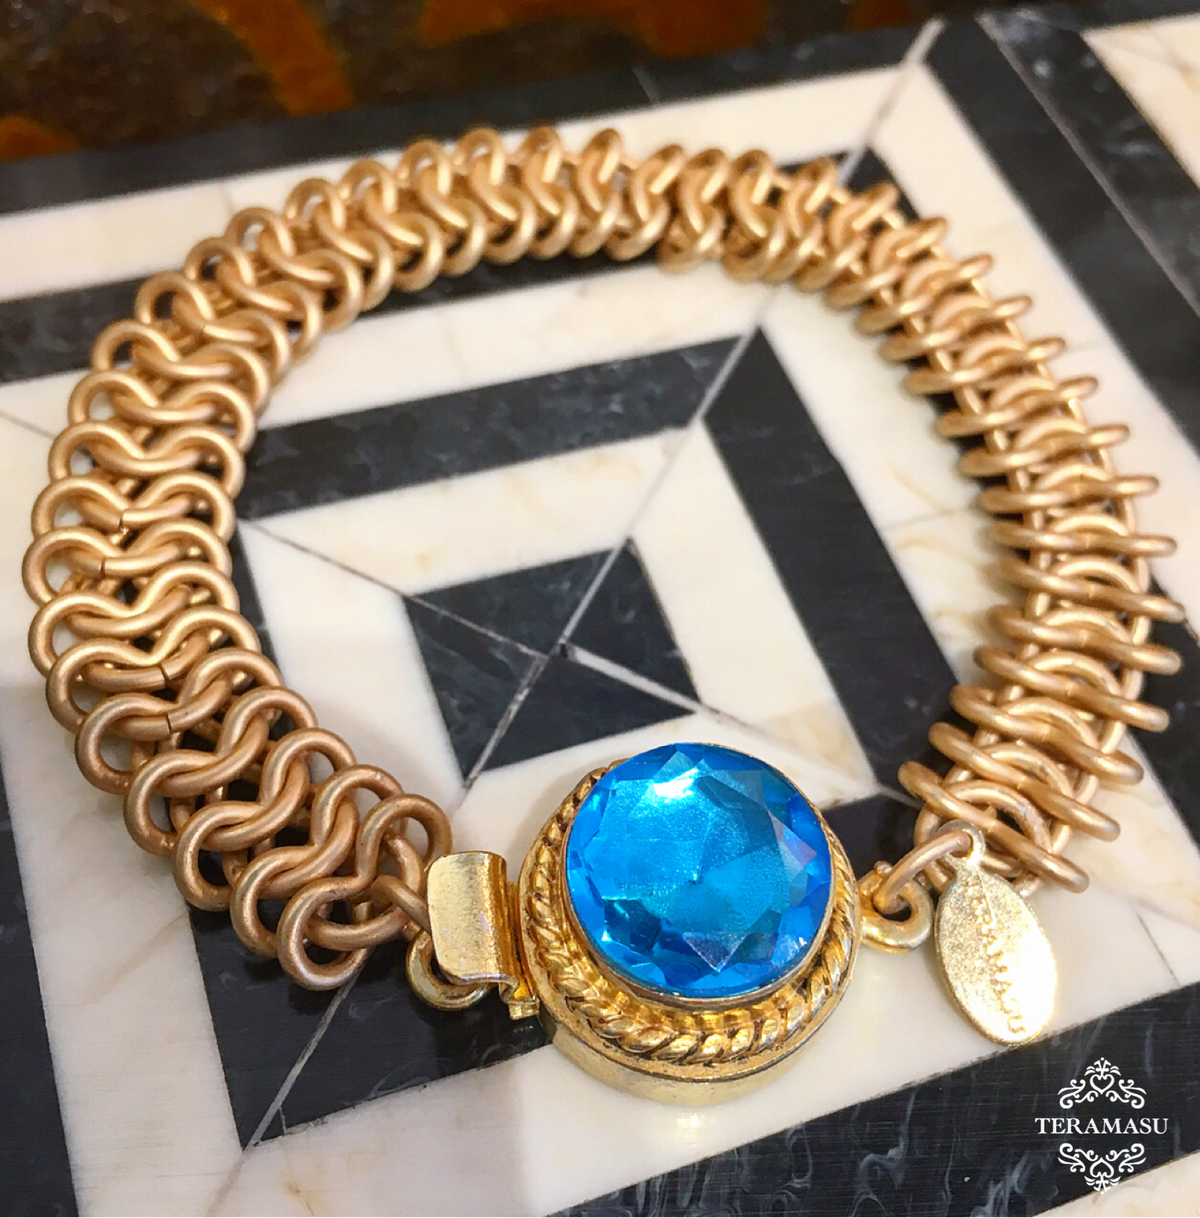 Living Ladylike: Add a Little Sparkle to Your Style with our Teramasu Gold Chain and One of a Kind Blue Crystal Stone Box Clasp Bracelet